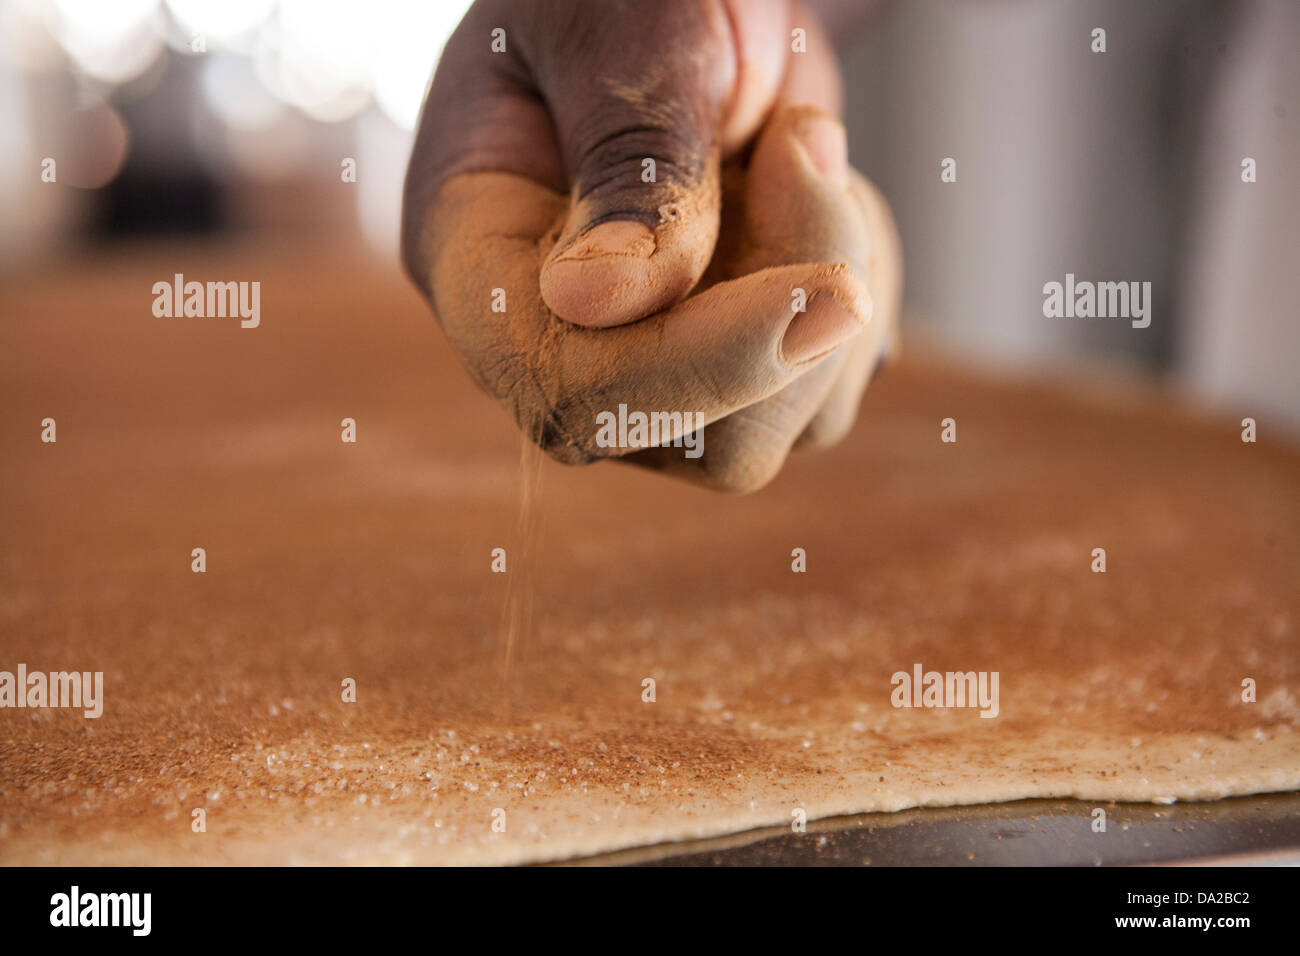 african american women making cinnamon buns from scratch Stock Photo